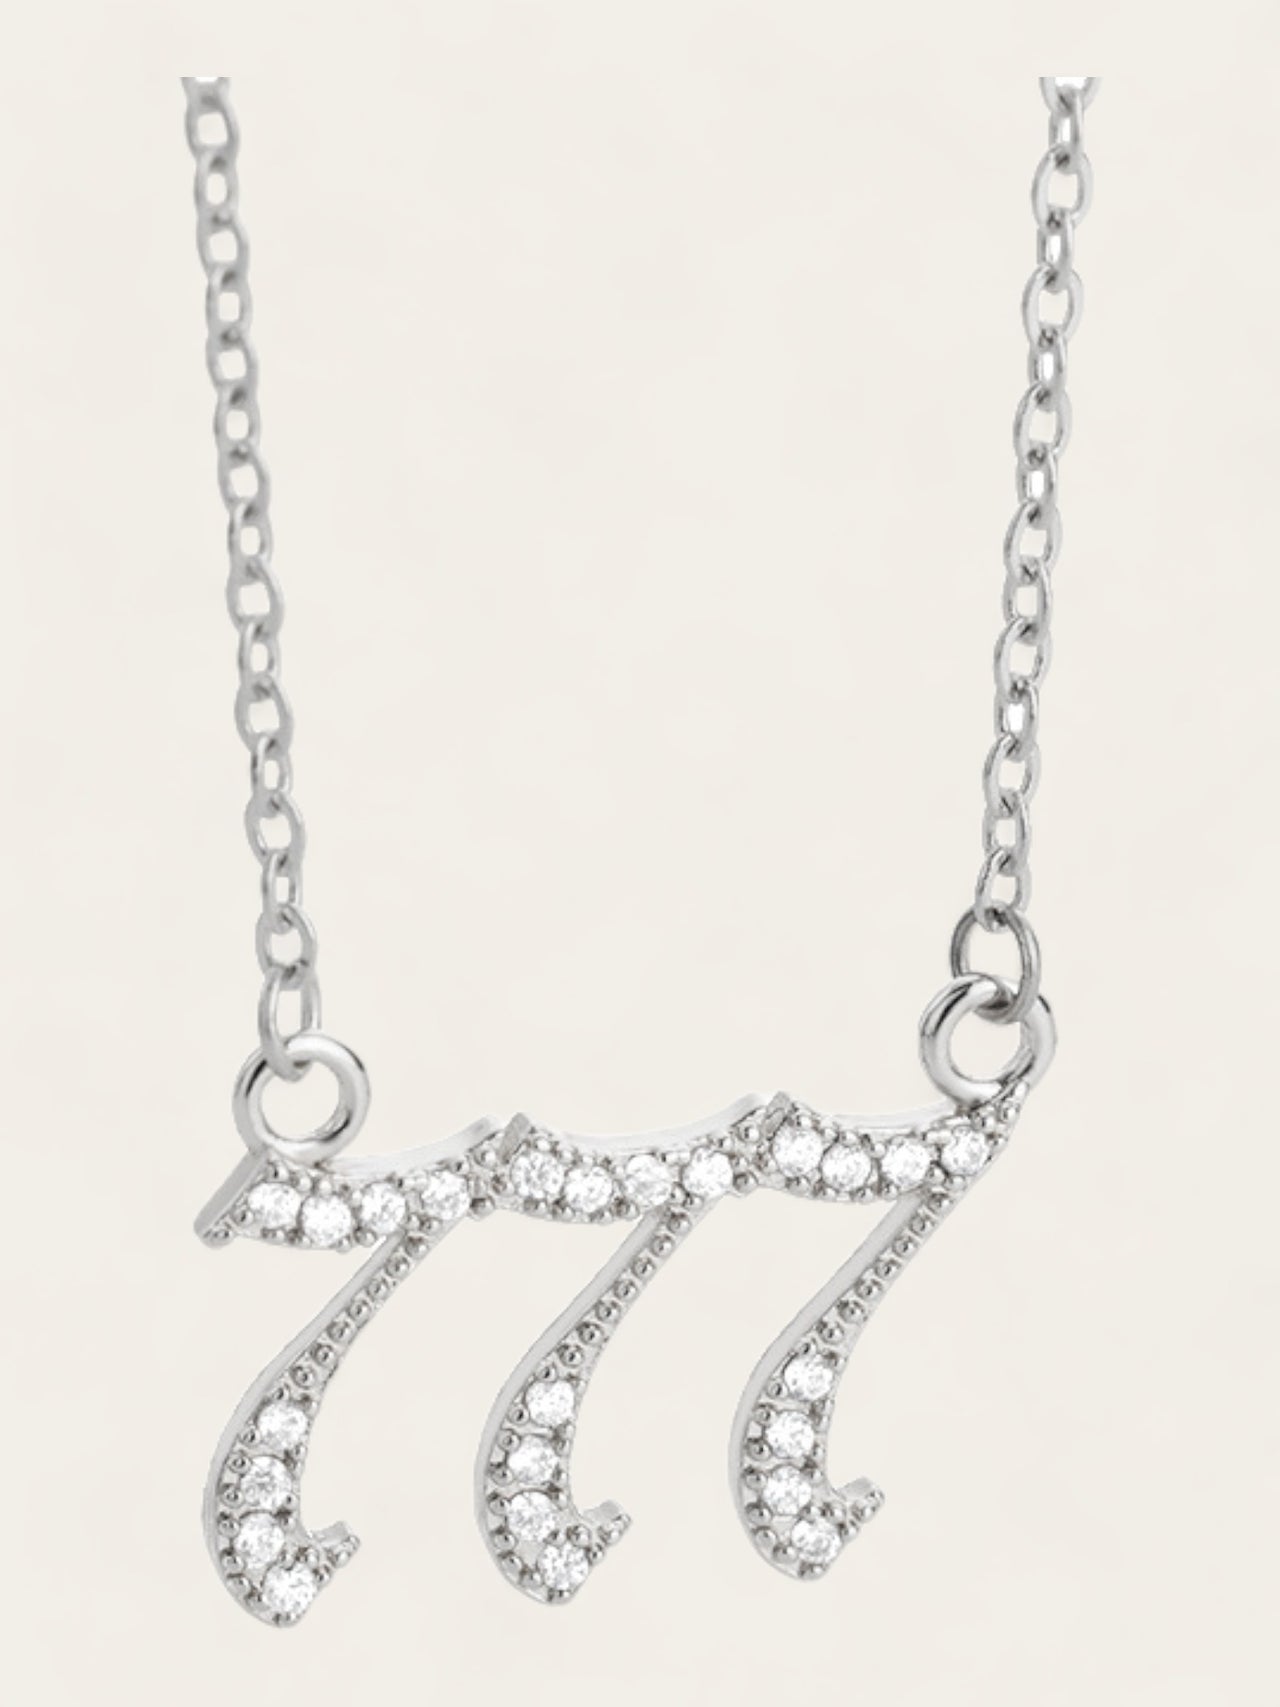 Diamond Angel Number Necklace - Silver